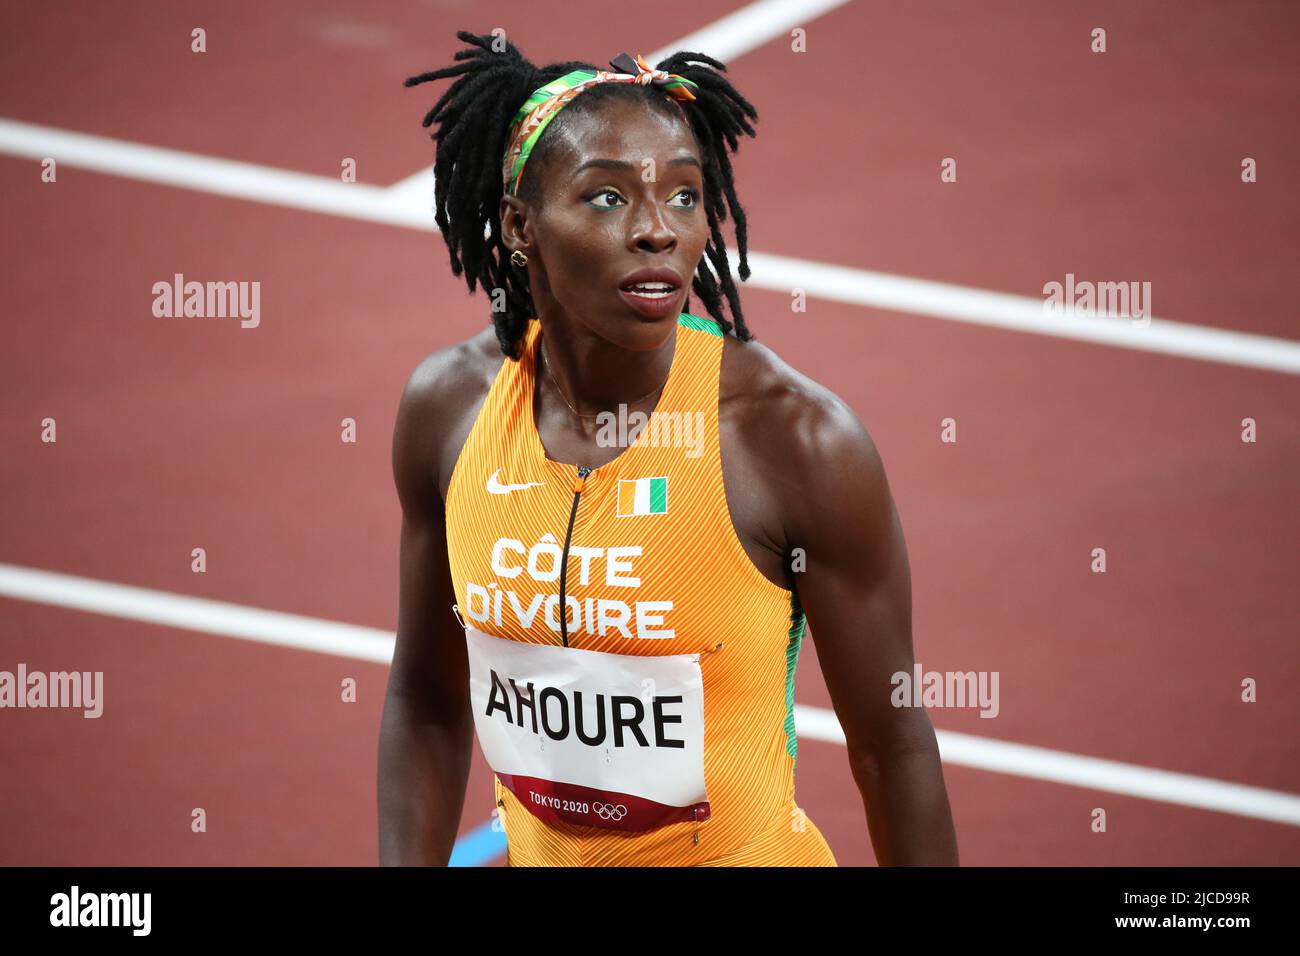 JULY 31st, 2021 - TOKYO, JAPAN: Murielle Ahoure of Ivory Coast in action during the Women's 100m Semi-Finals at the Tokyo 2020 Olympic Games (Photo: M Stock Photo